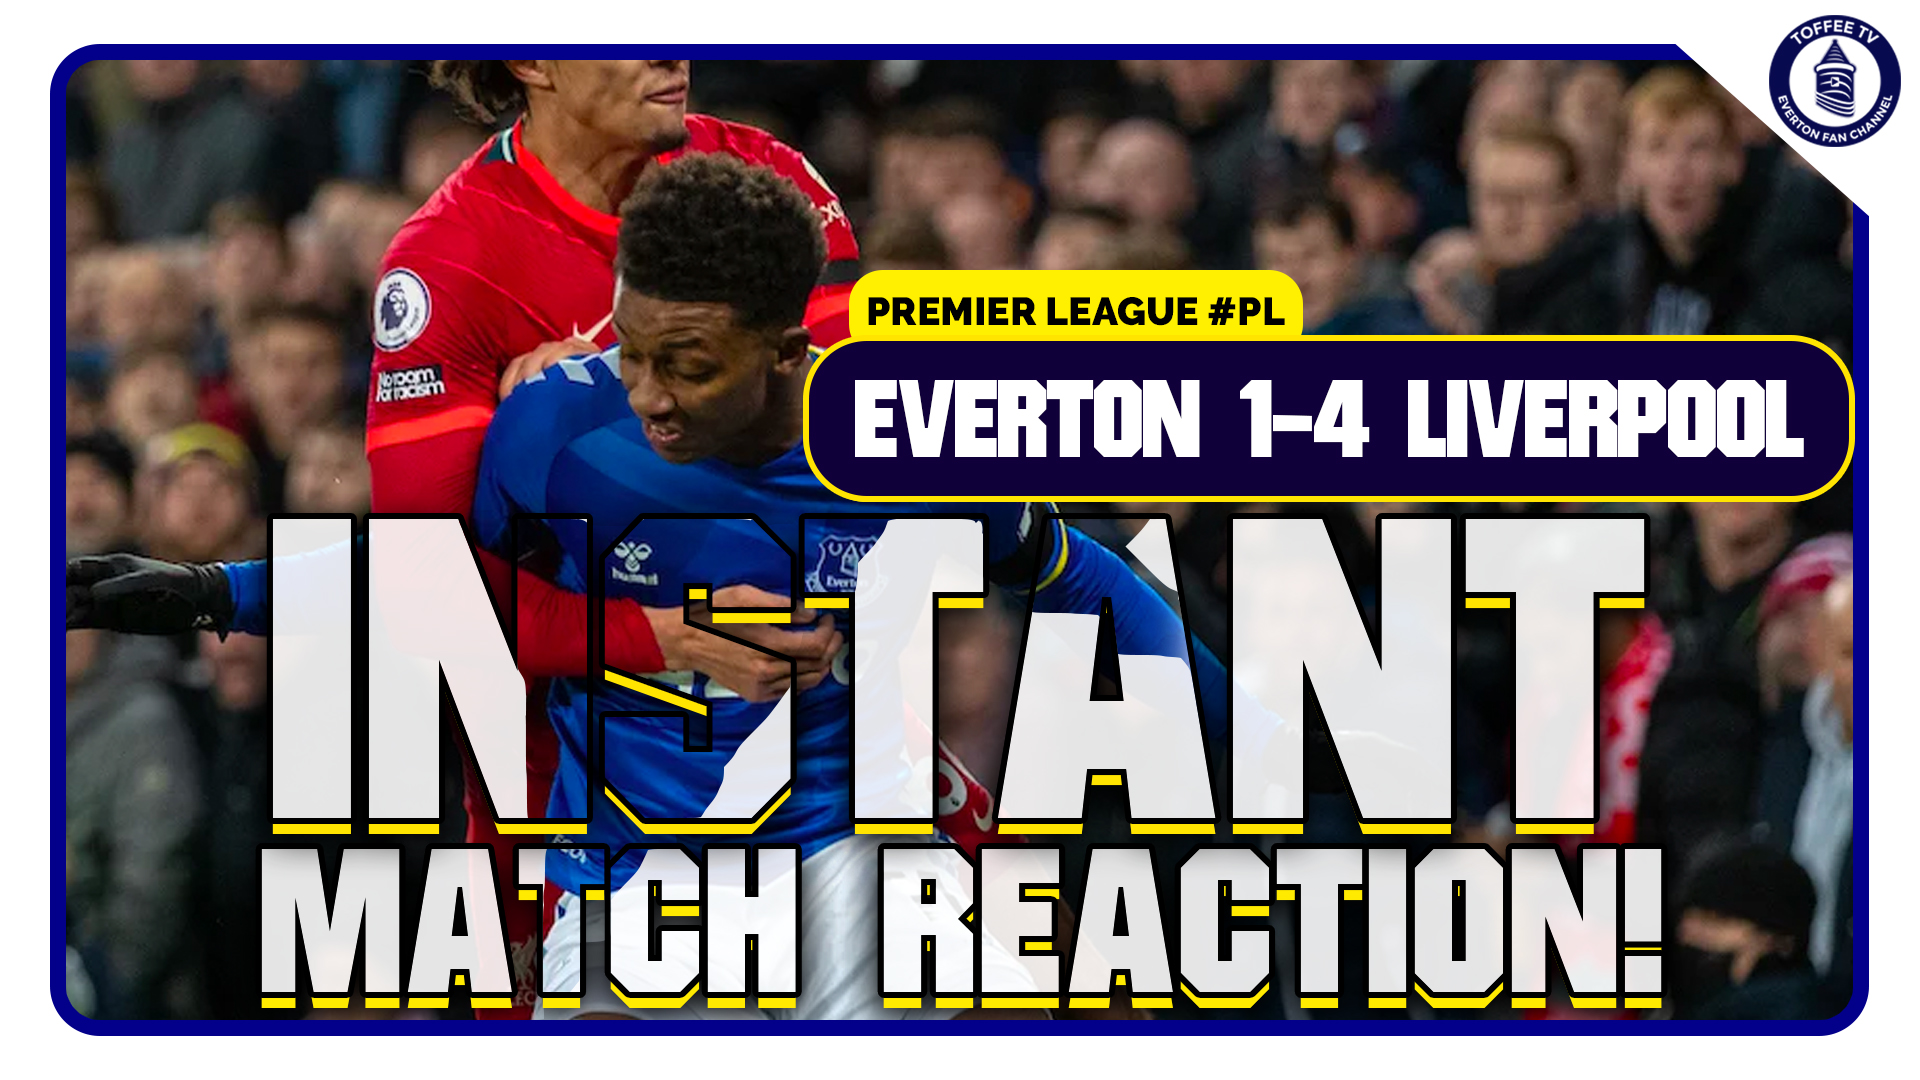 Featured image for “Everton 1-4 Liverpool | Match Reaction”